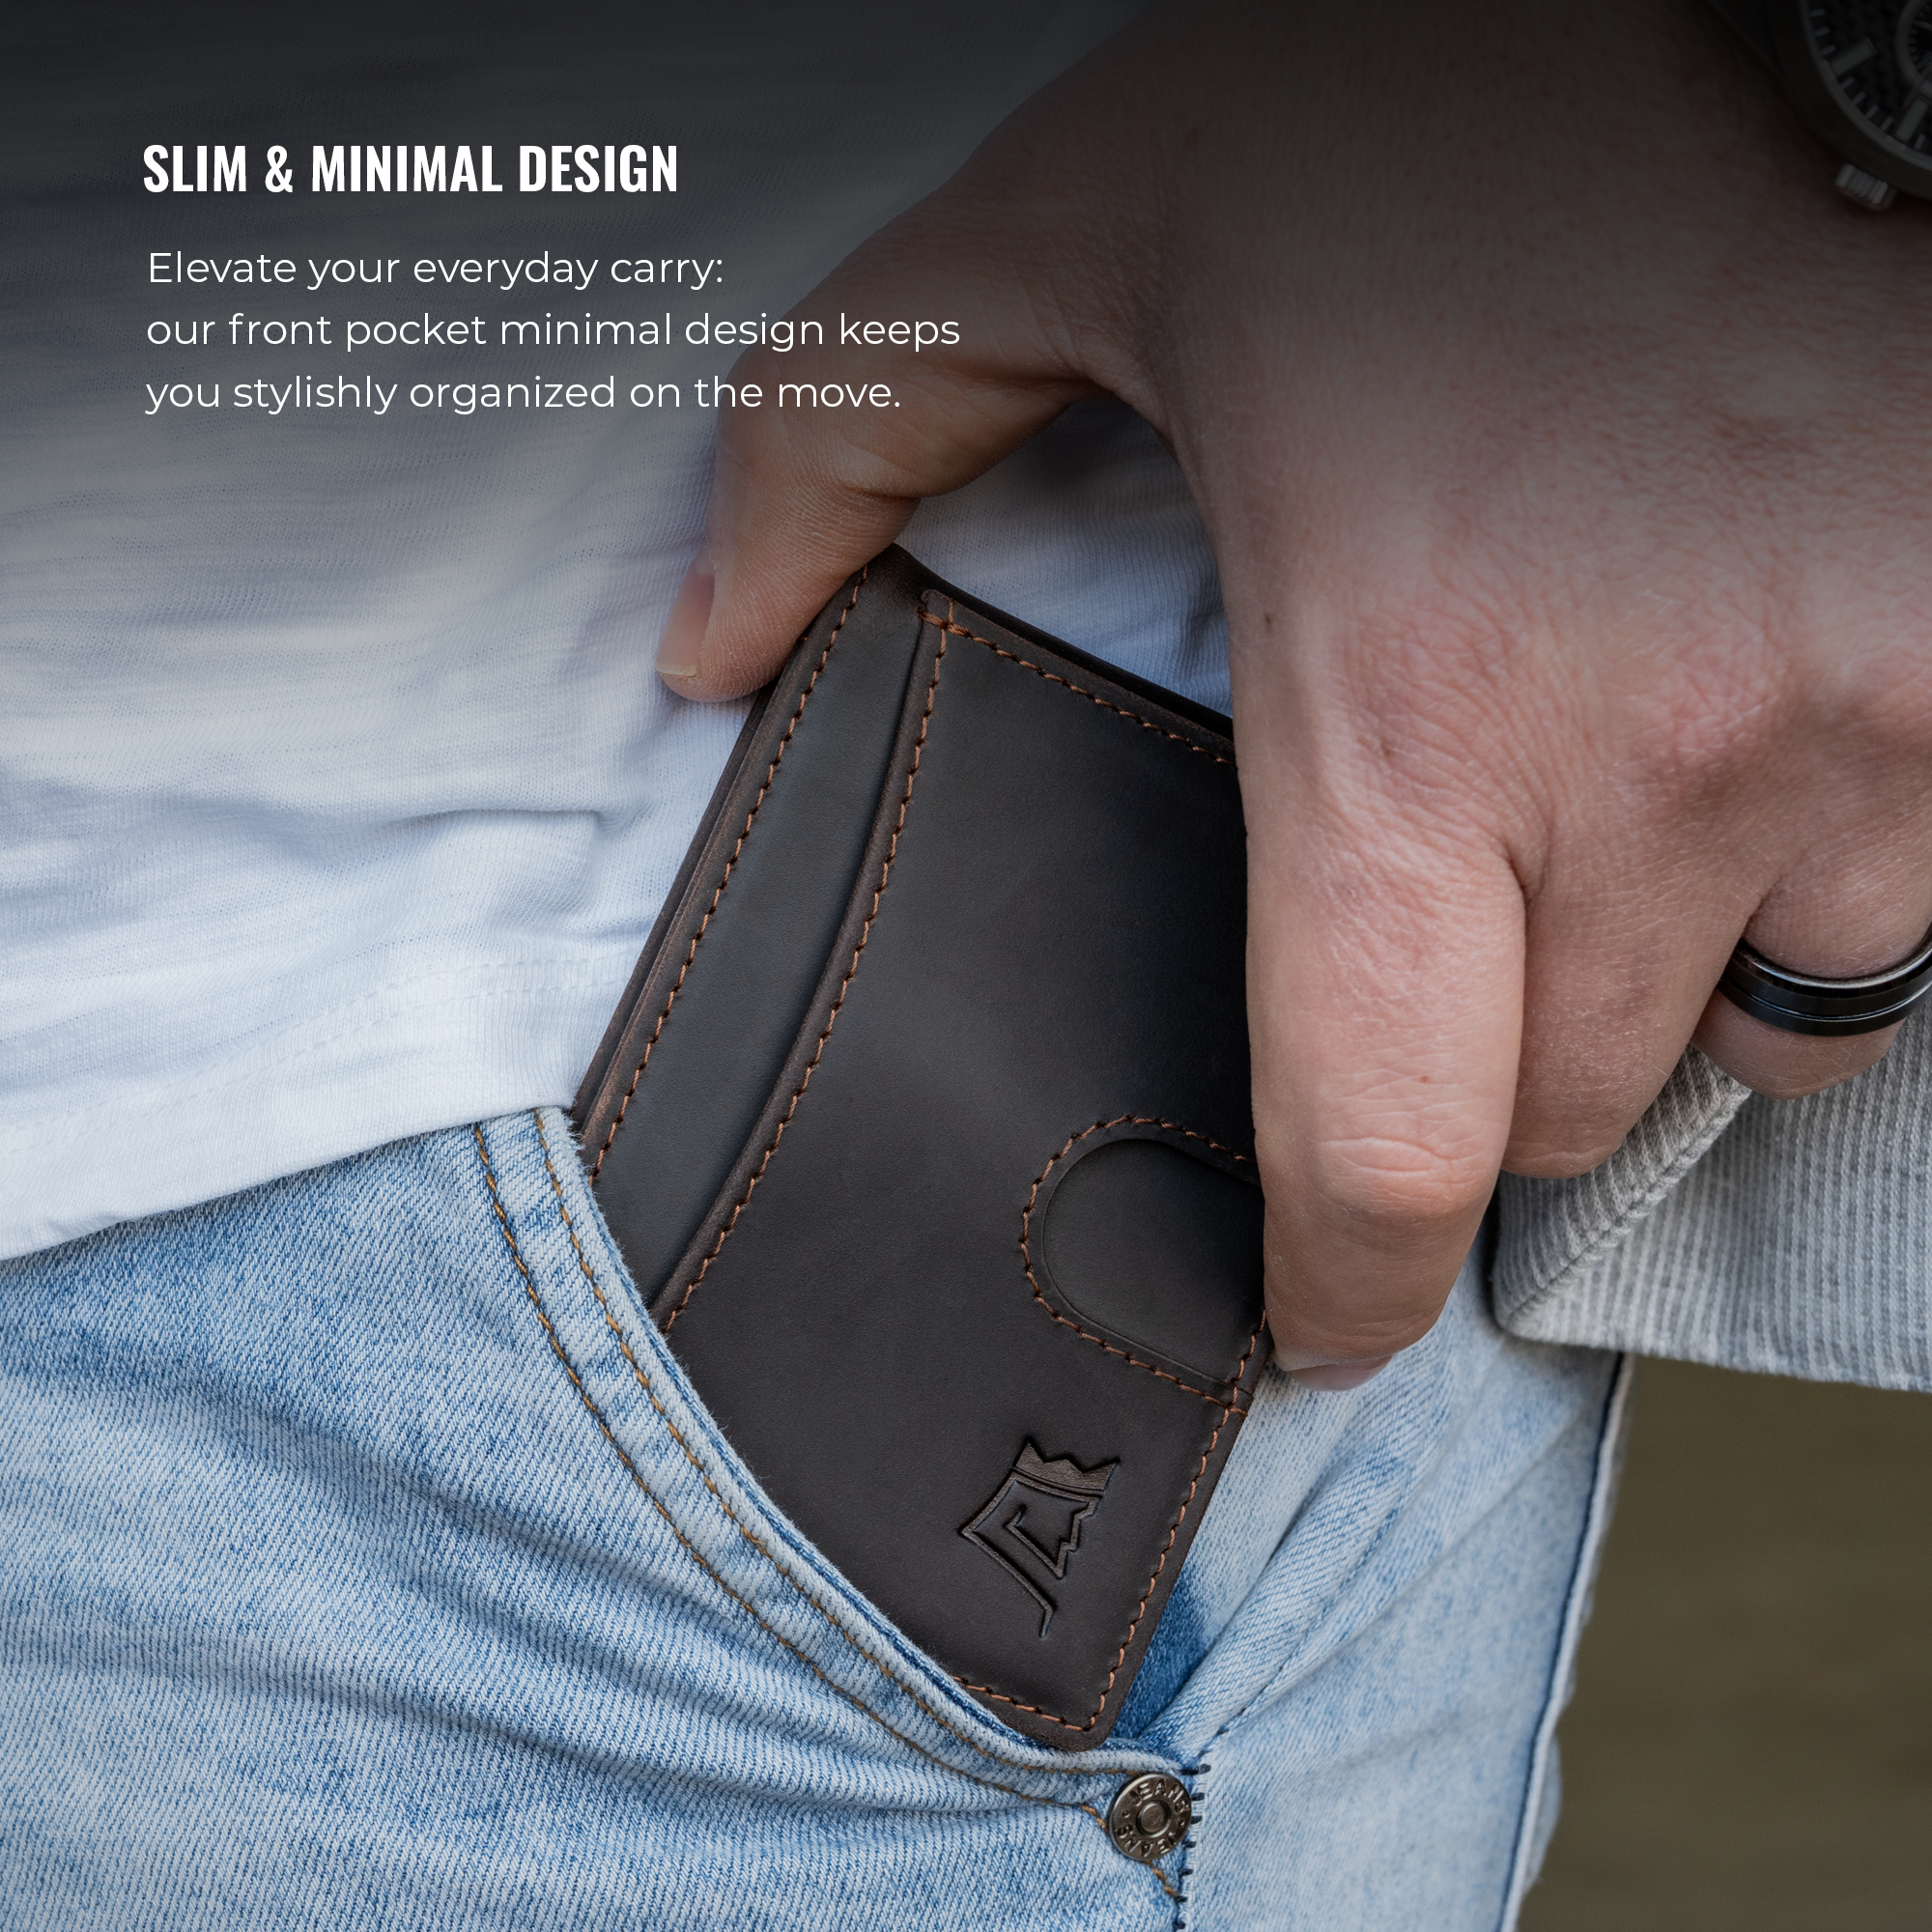 Person inserting a slim leather wallet into their front jeans pocket.